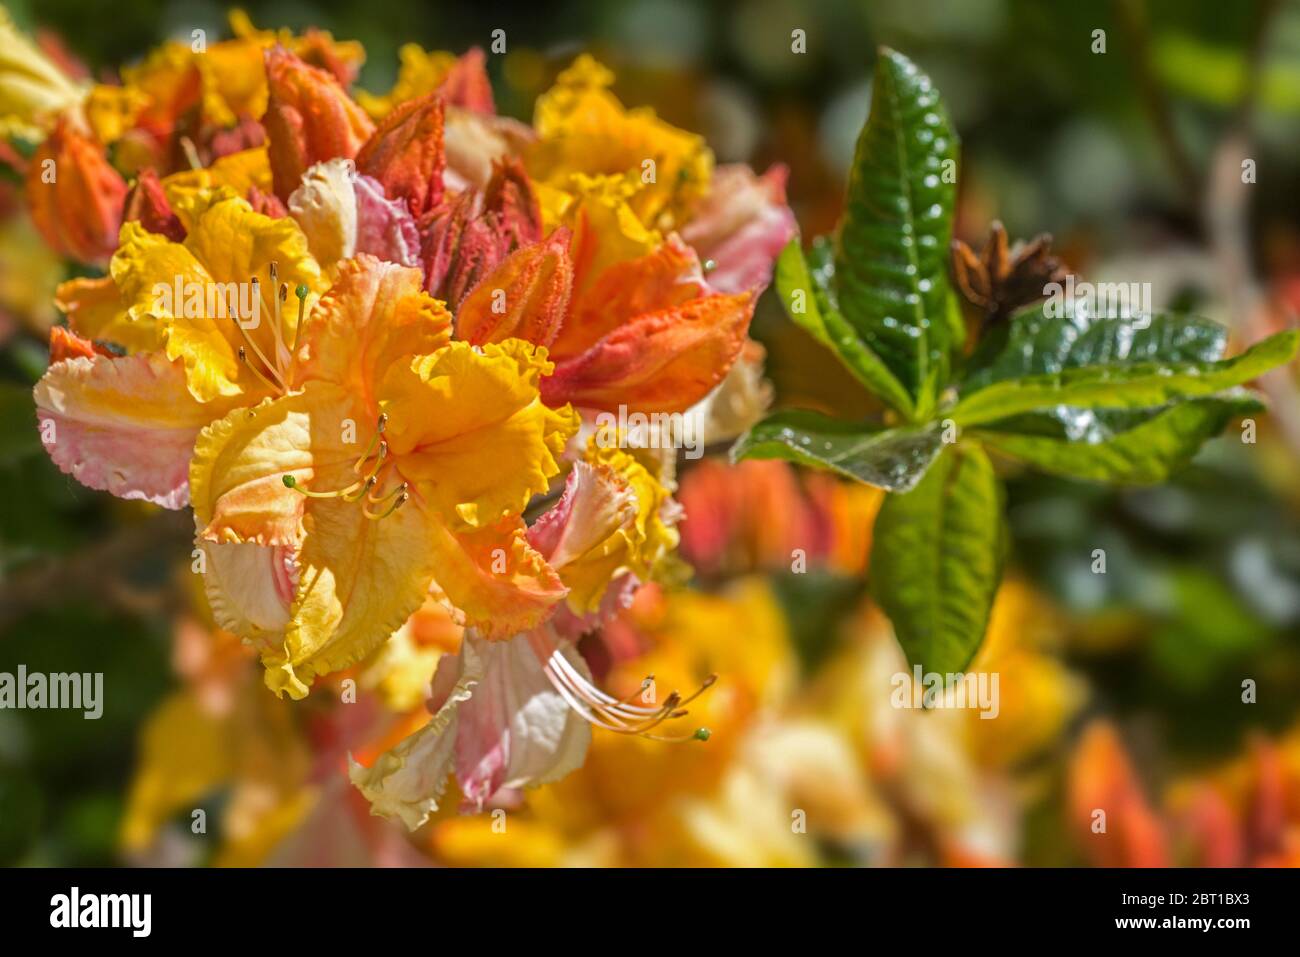 Washington State Centennial Azalea / Rhododendron Washington State Centennial, close up showing orange flowers and leaves in spring Stock Photo